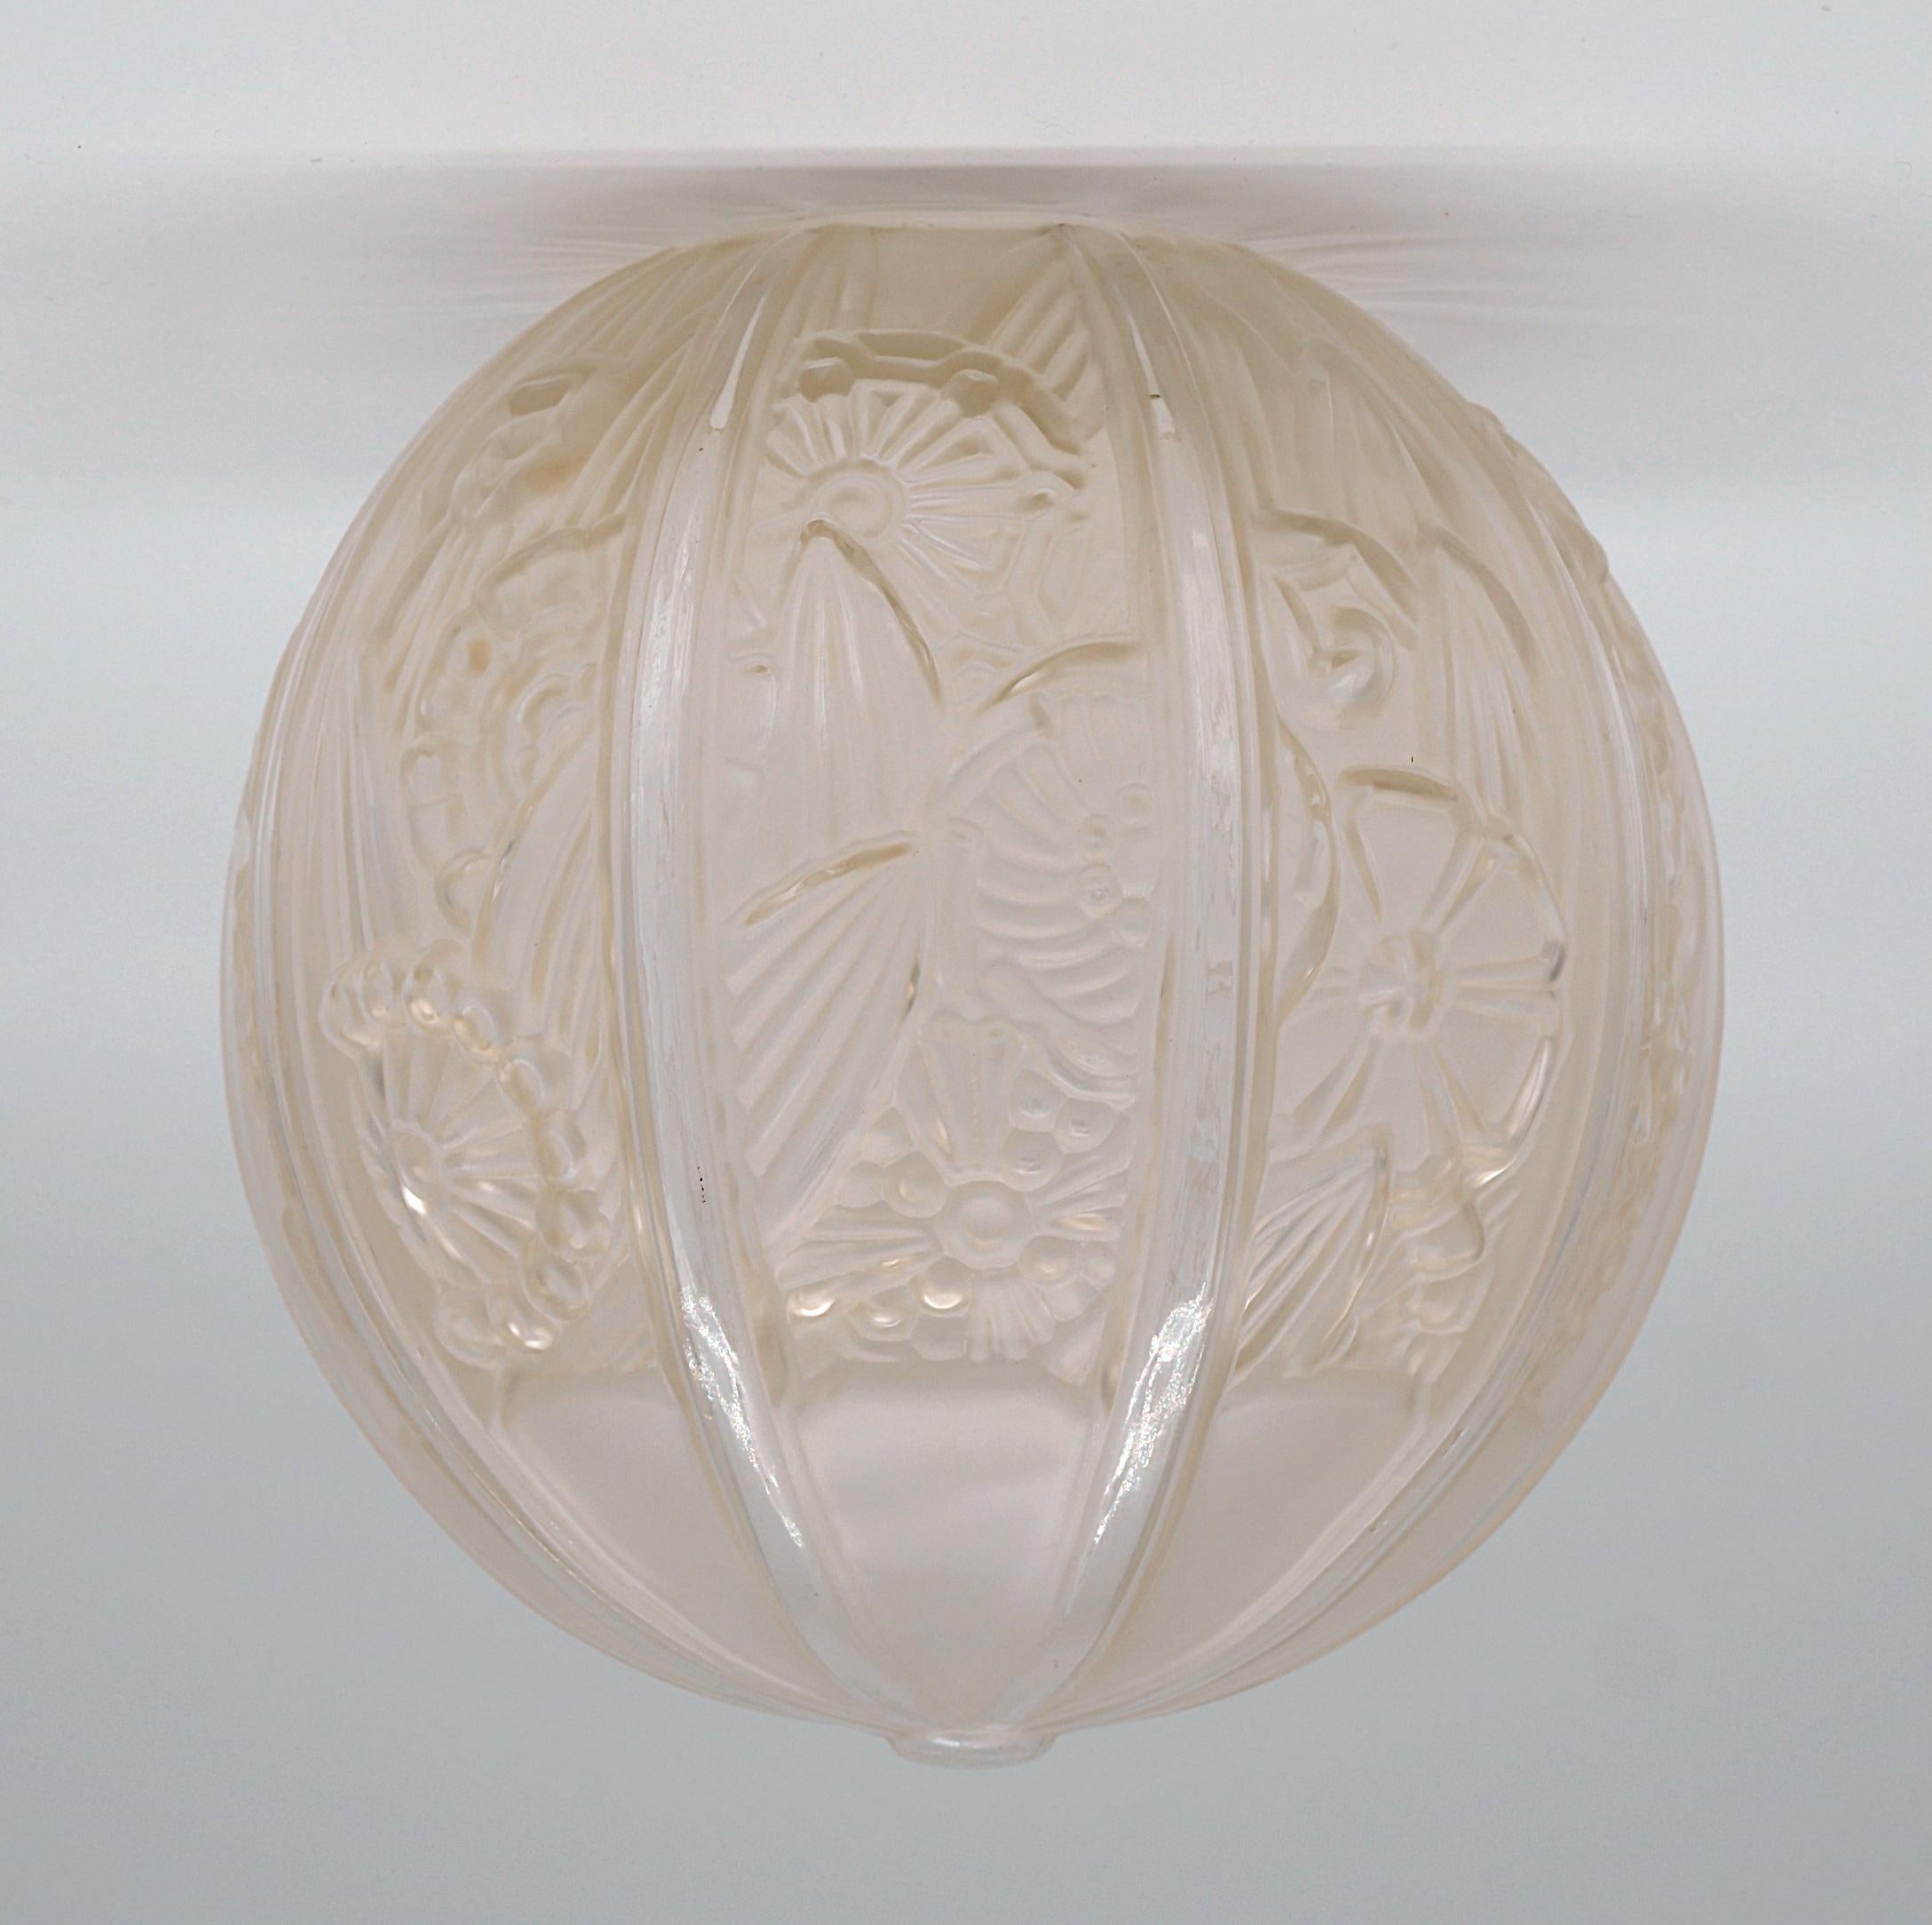 Frosted Hettier-Vincent Pair of French Art Deco Pendants Chandeliers, circa 1925